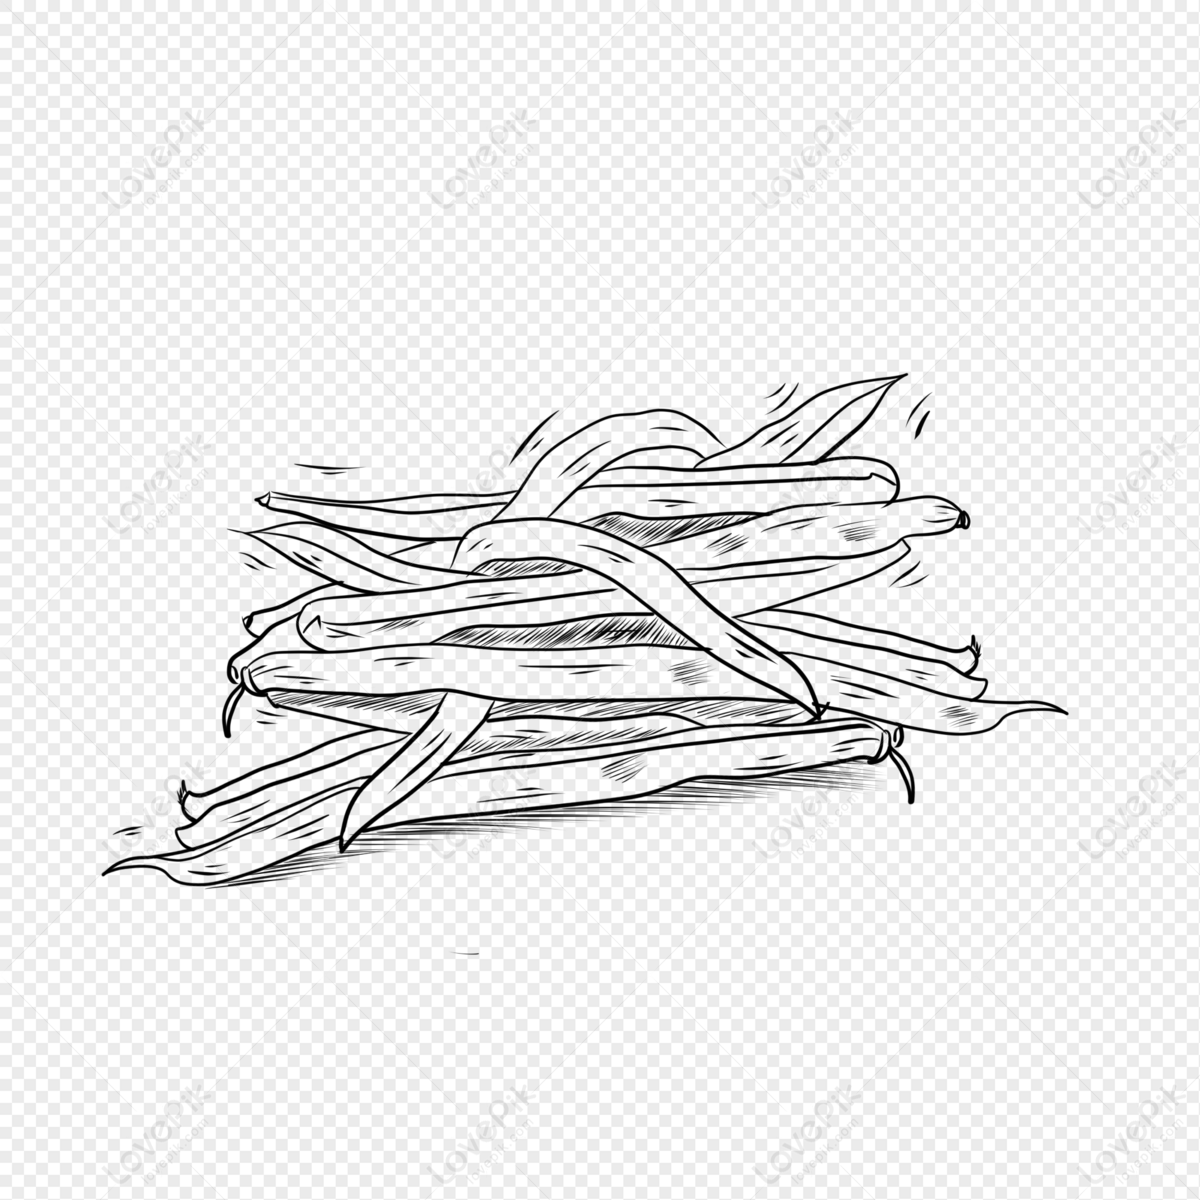 green beans clipart black and white